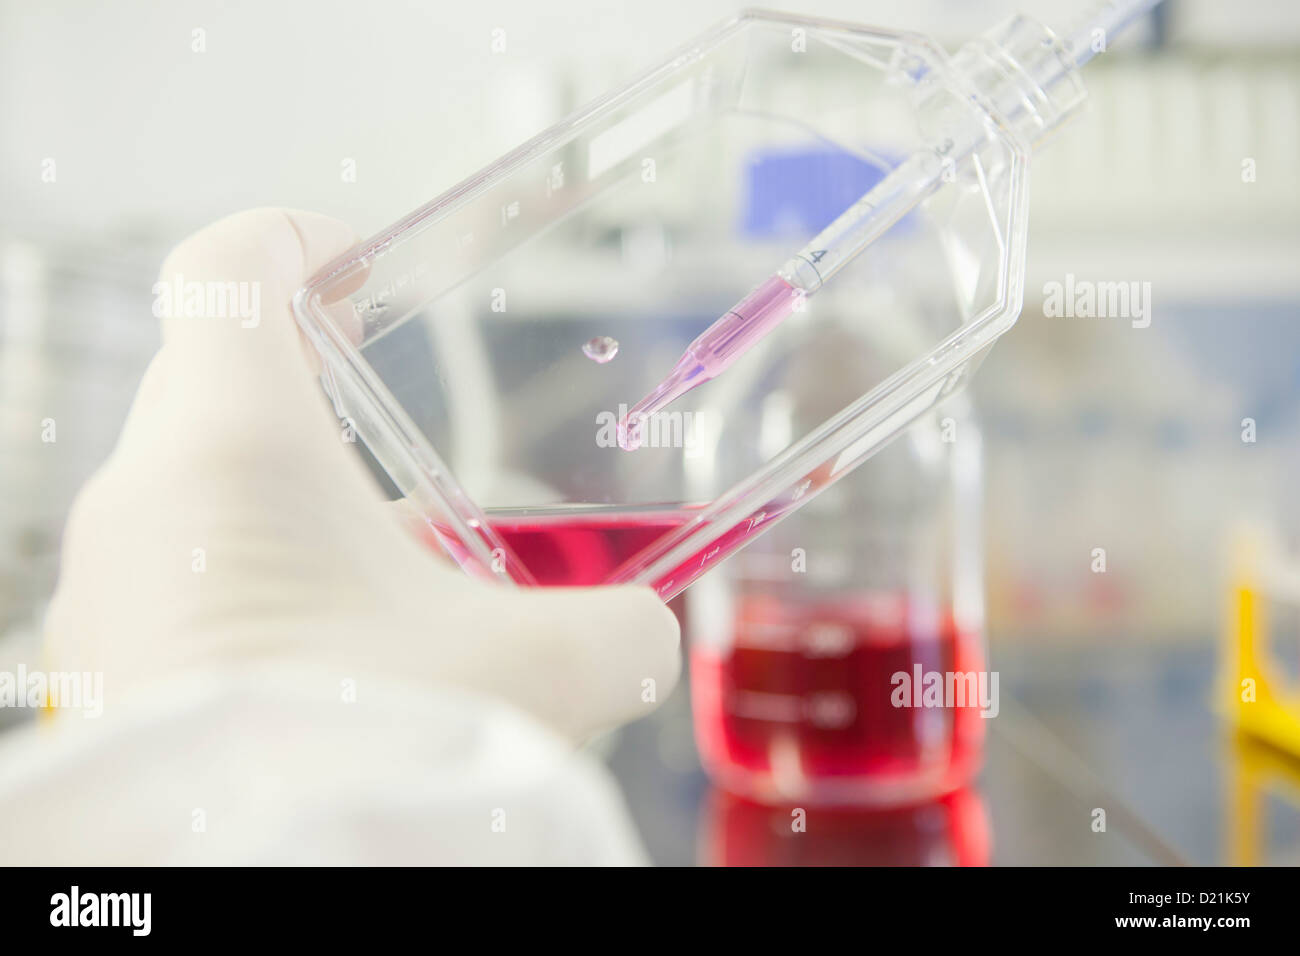 Germany, Bavaria, Munich, Scientist working with cell culture in laboratory Stock Photo